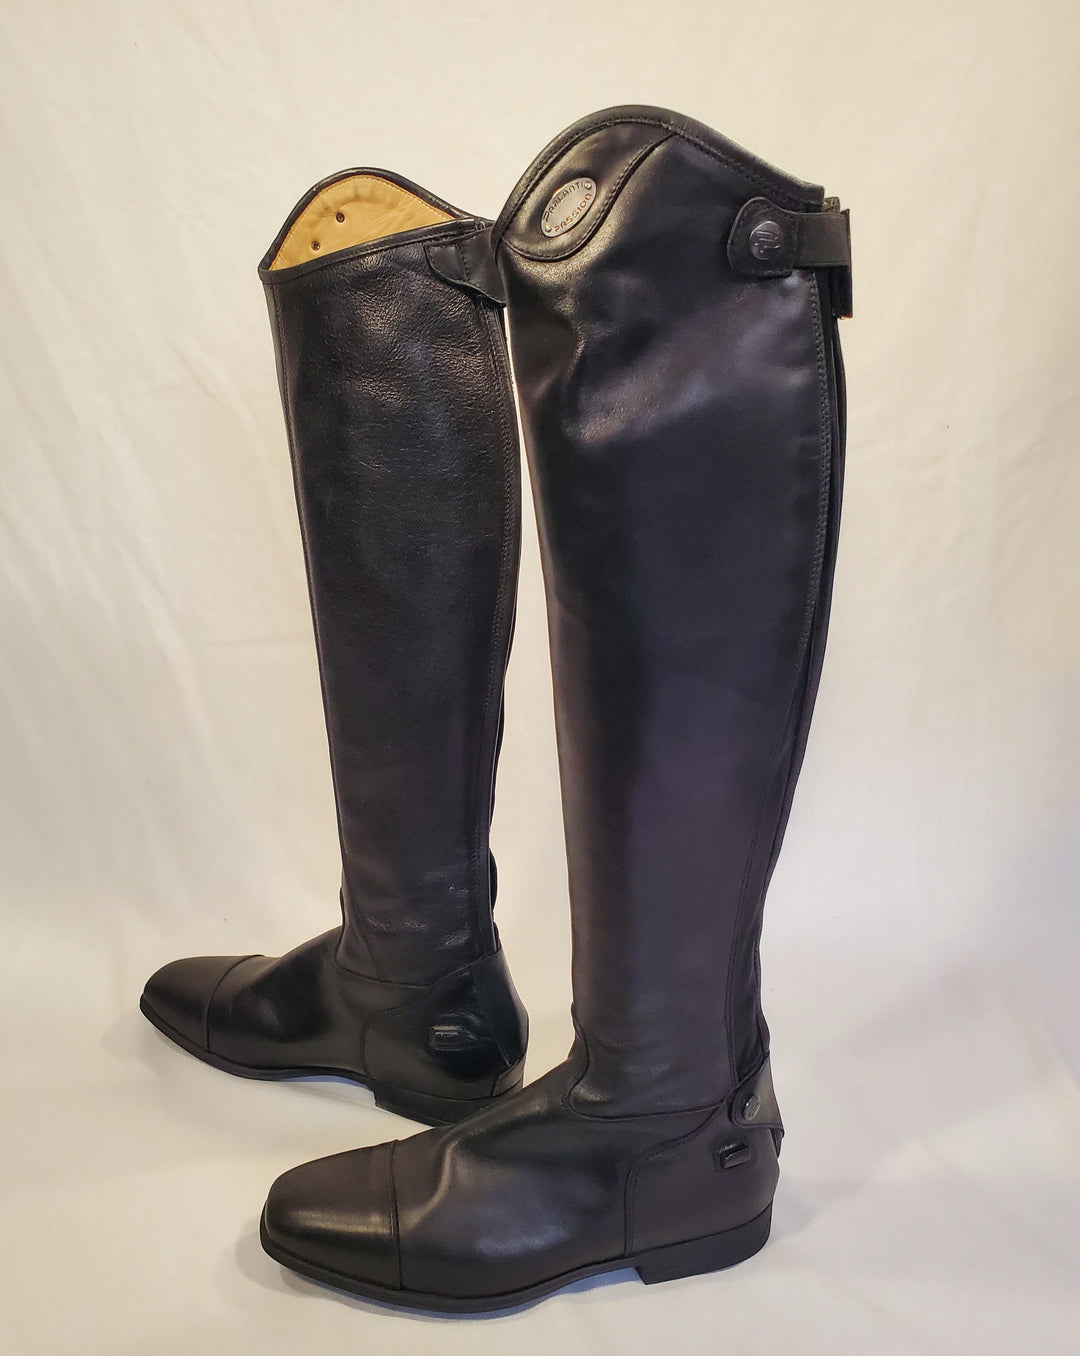 Riding Boots & Half Chaps – The Show Trunk